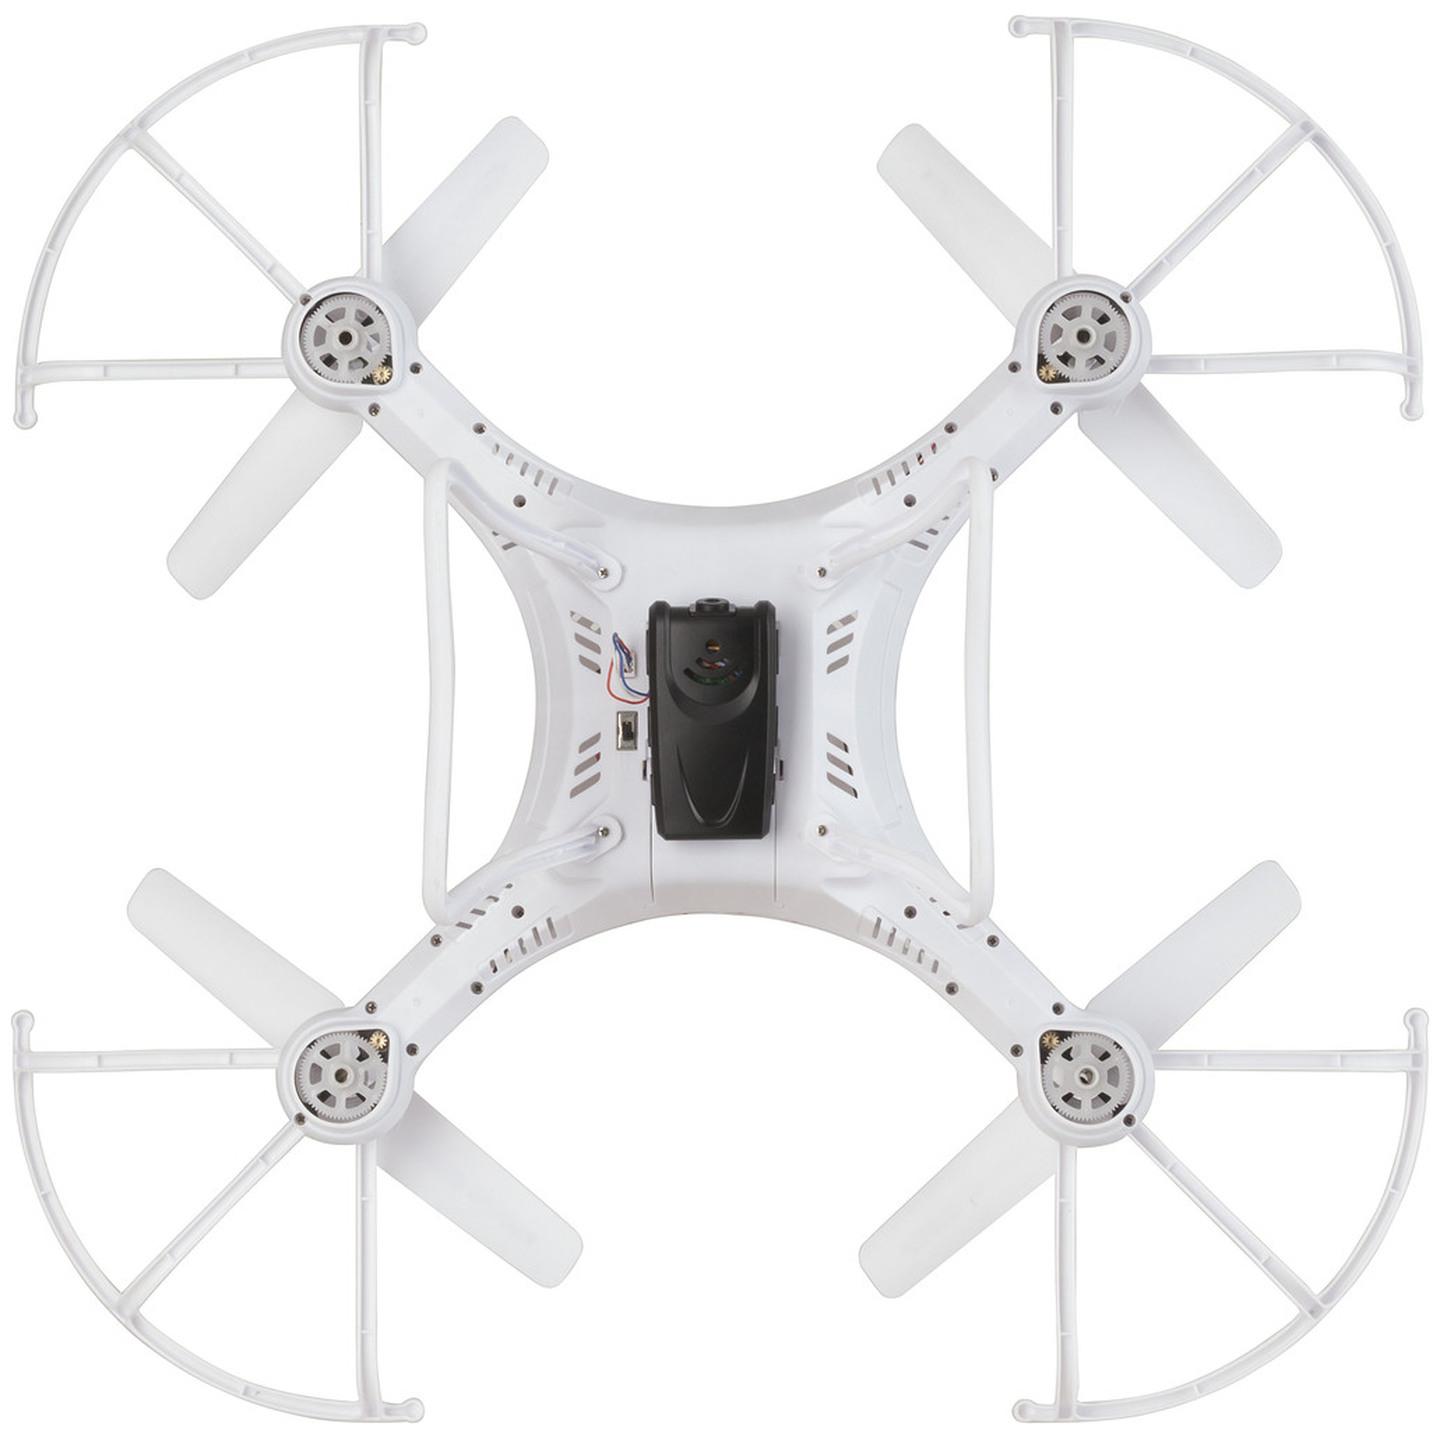 4 Channel Remote Control Quadcopter with 720p Camera